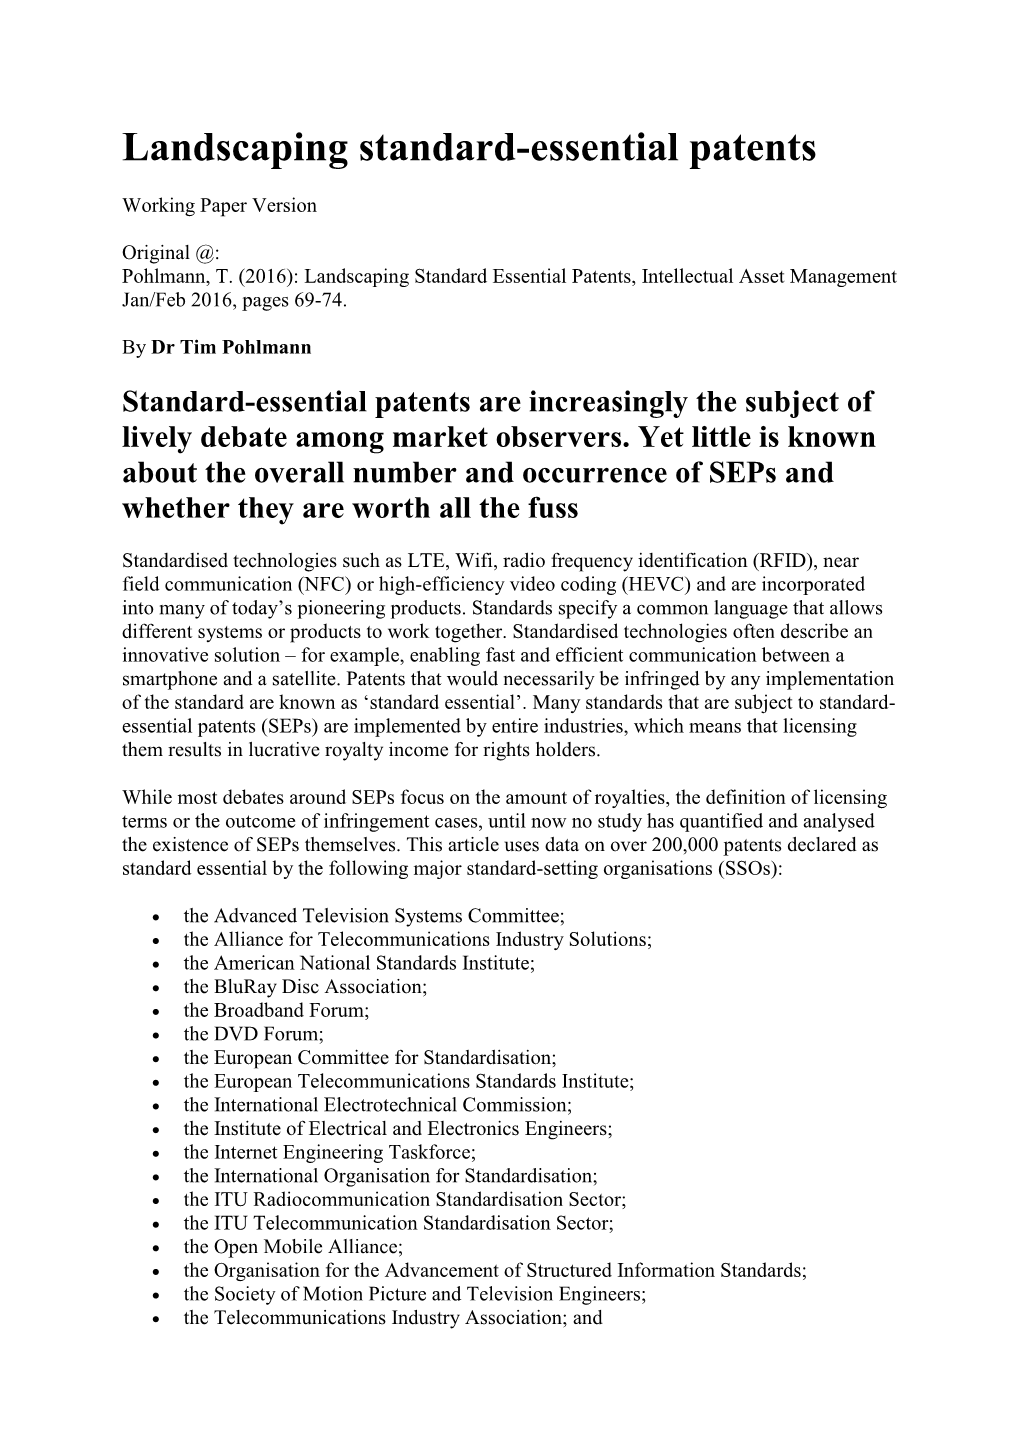 Landscaping Standard-Essential Patents